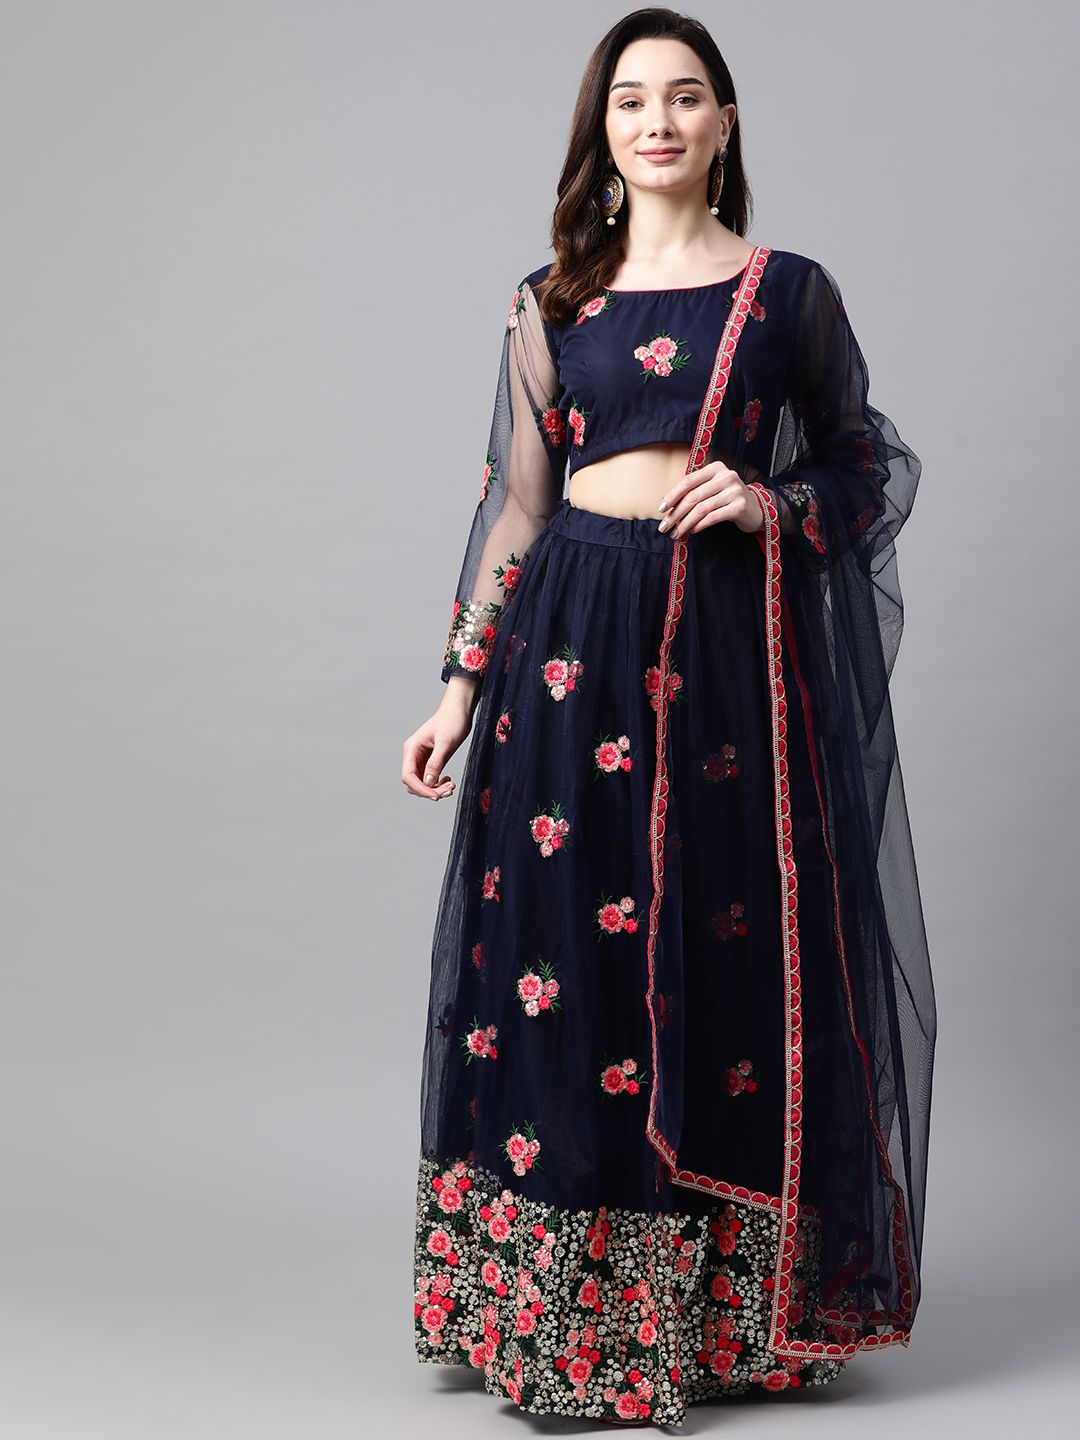 Readiprint Fashions Navy Blue Embroidered Semi-Stitched Lehenga & Blouse with Dupatta Price in India